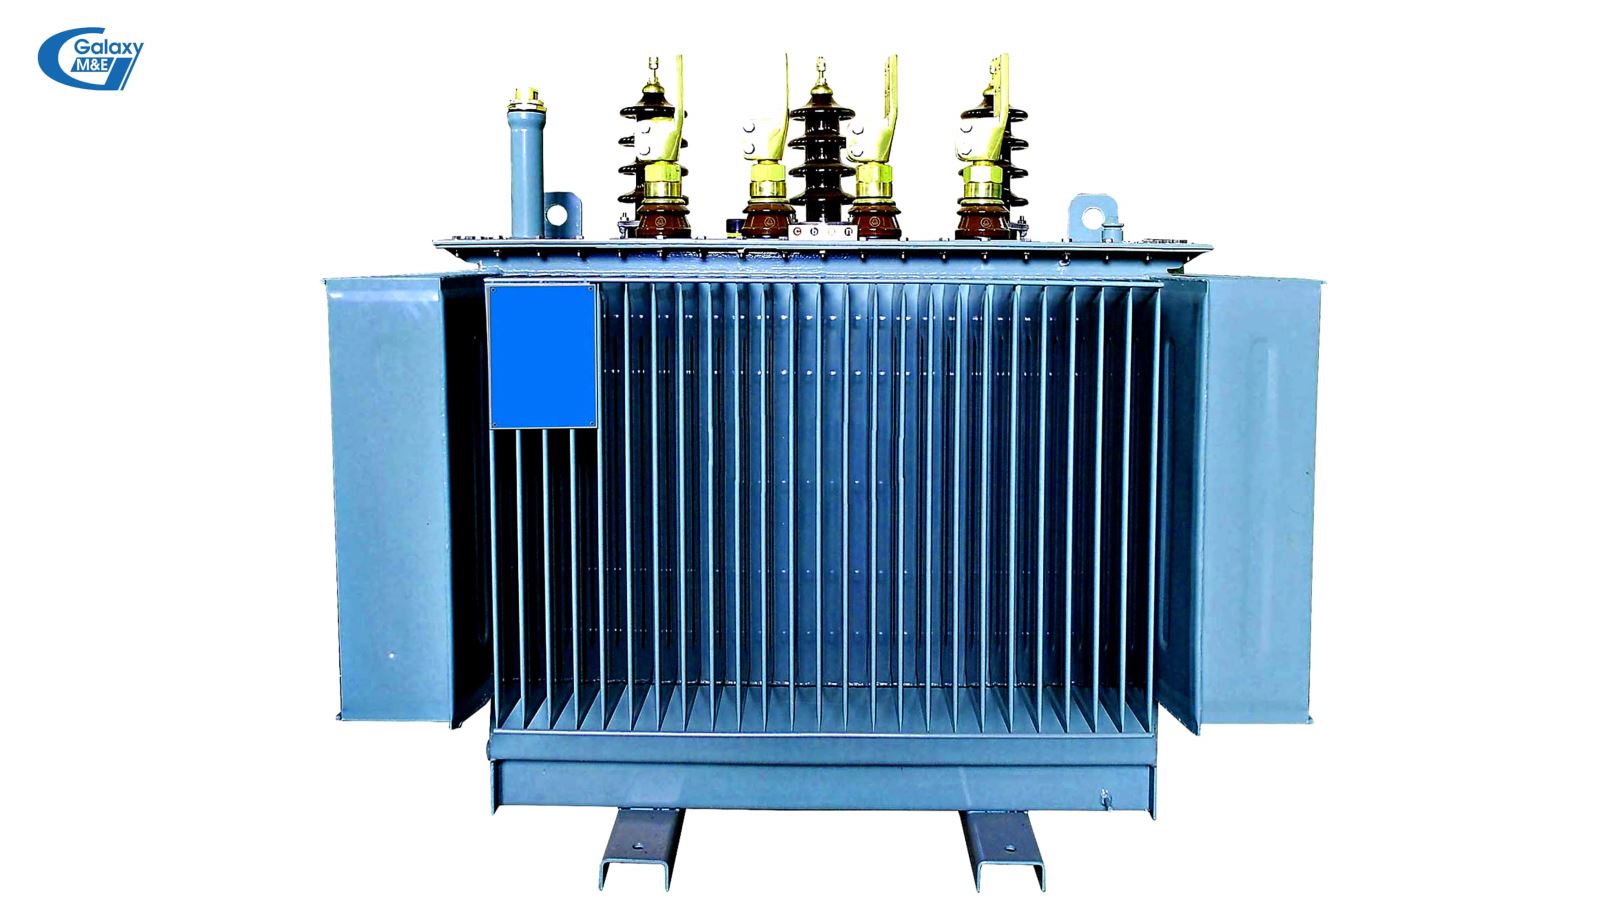 When calculating the capacity of the transformer to be purchased/installed, it is recommended to overload the equipment by multiplying the total load capacity by a factor of 1,2 or 1,4.